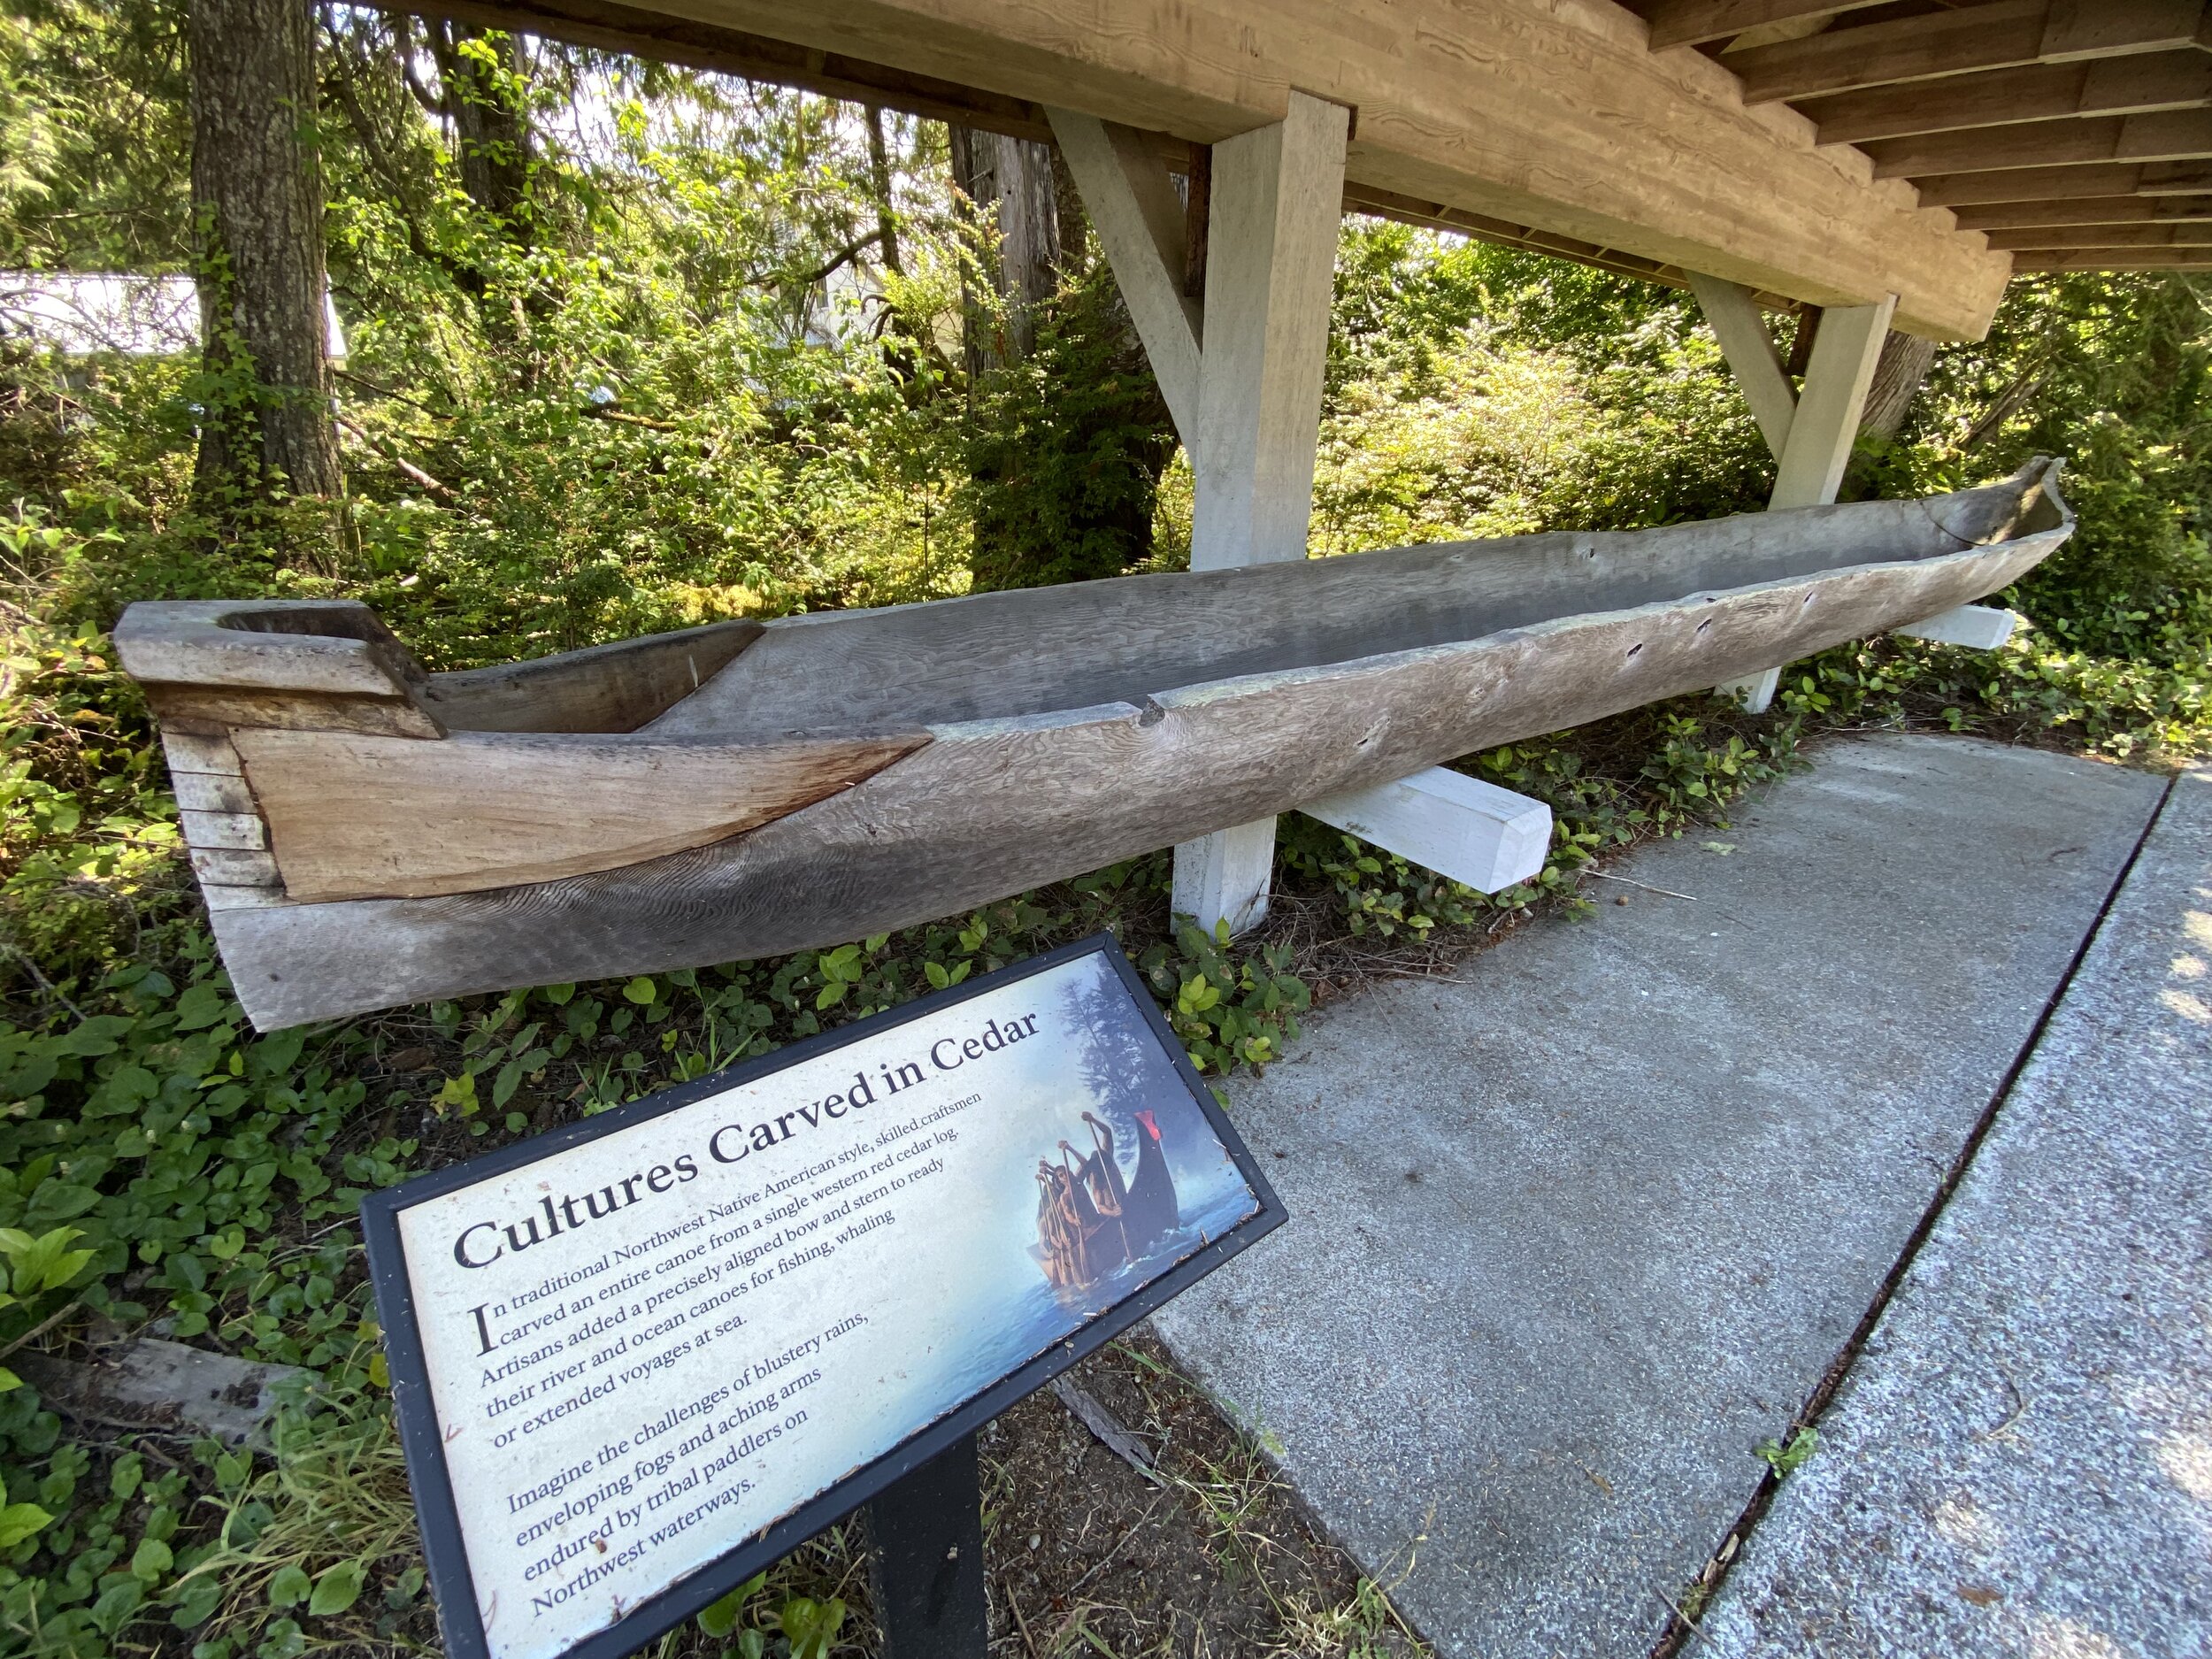 A traditional native canoe carved out of one giant red cedar (at the ranger station)